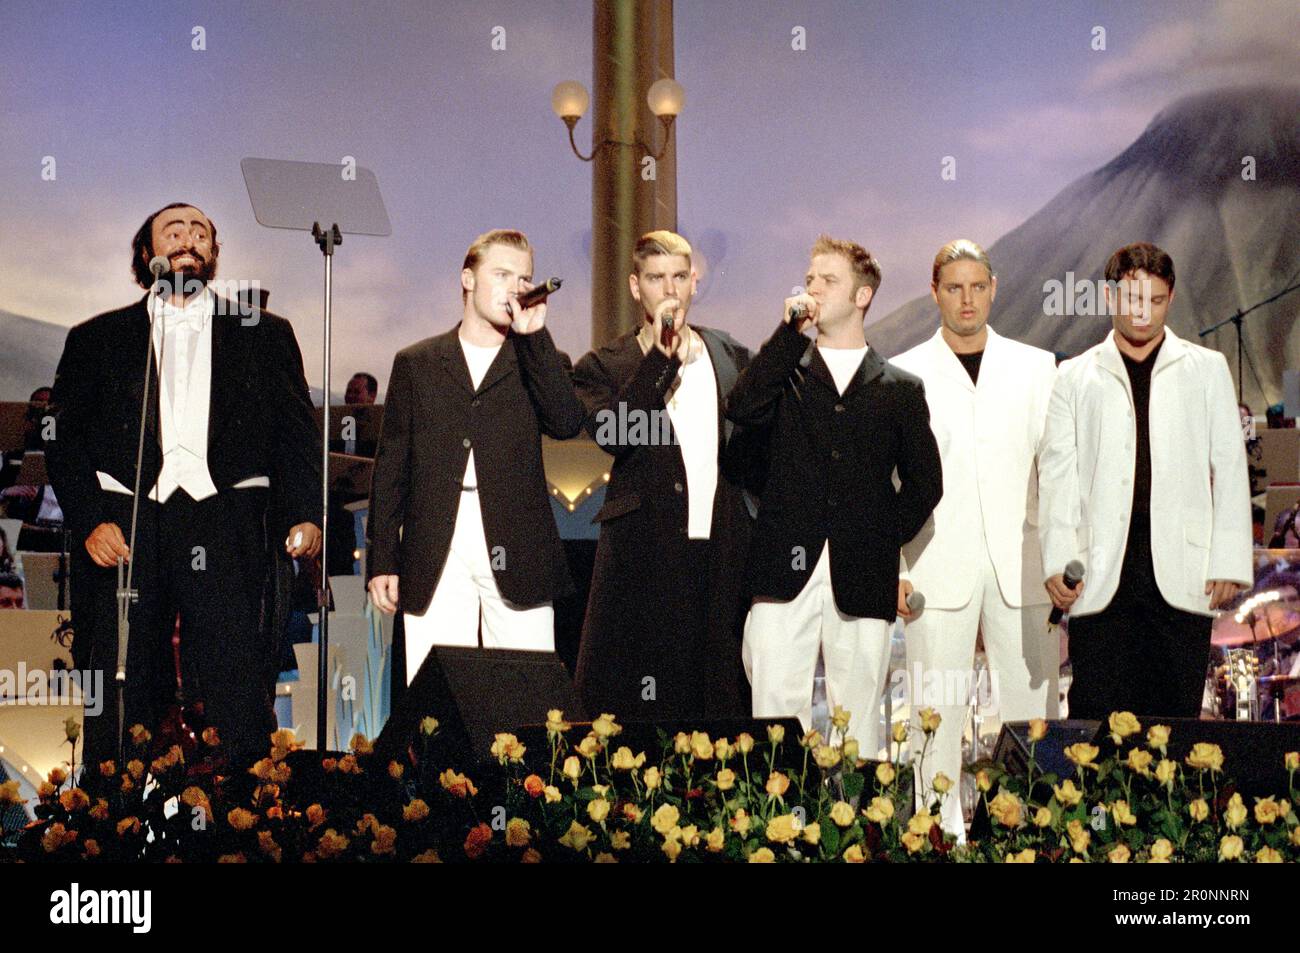 Modena  Italy 1999-06-01: Luciano Pavarotti and Boyzone in concert at the Charity event 'Pavarotti & Friends 99' in concert for Guatemala at Novi Sad Park Stock Photo